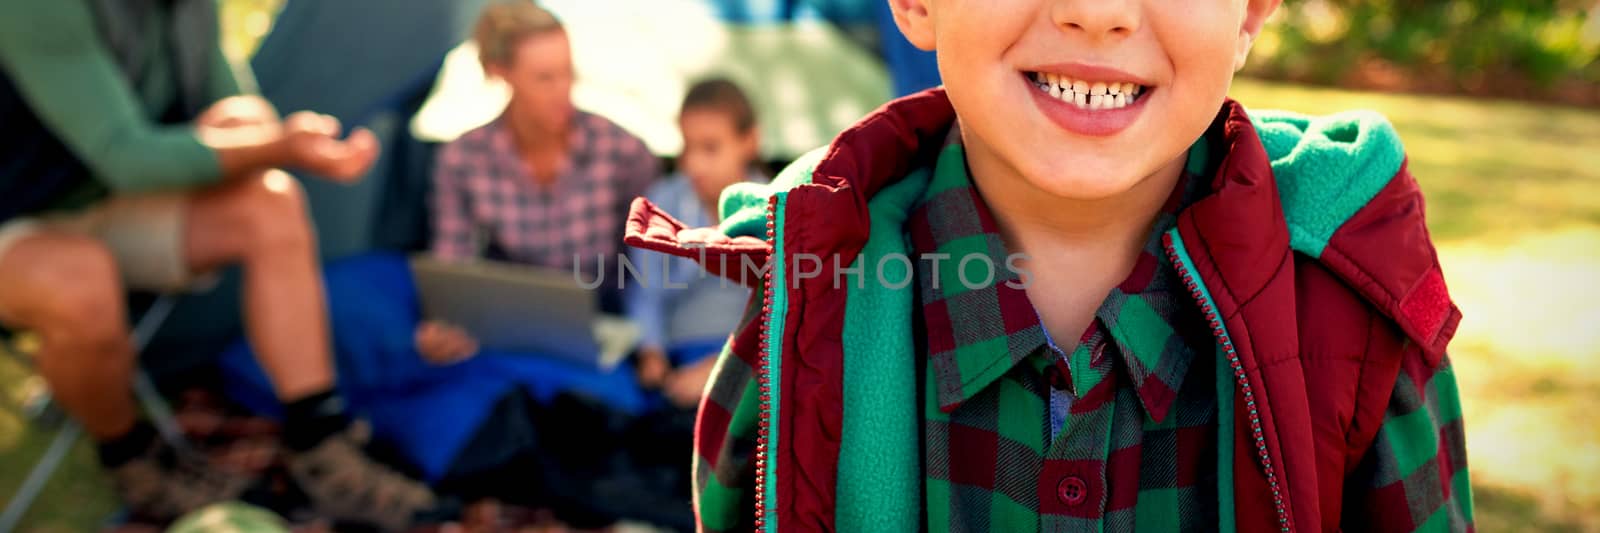 Boy smiling at camera while family sitting at tent in background by Wavebreakmedia